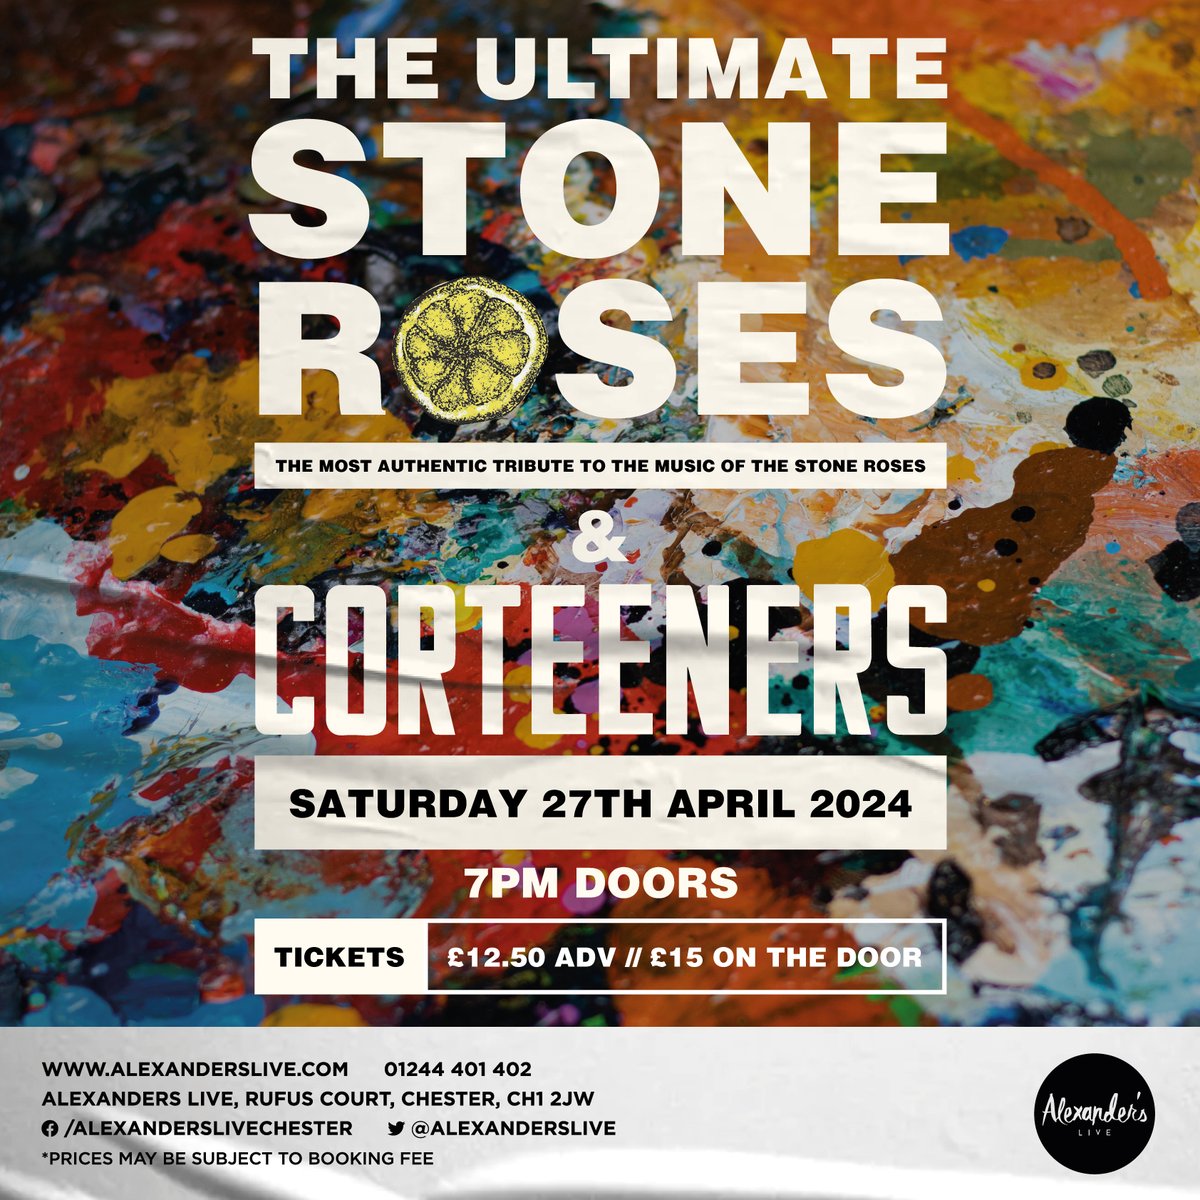 @rosesultimates are coming to Alexander's with support from The Corteeners! Tickets for 27th April are flying out so grab yours now - alexanderslive.seetickets.com @ShitChester @welovegoodtimes @Dee1063 @chesterdotcom @chestertweetsuk @SkintChester